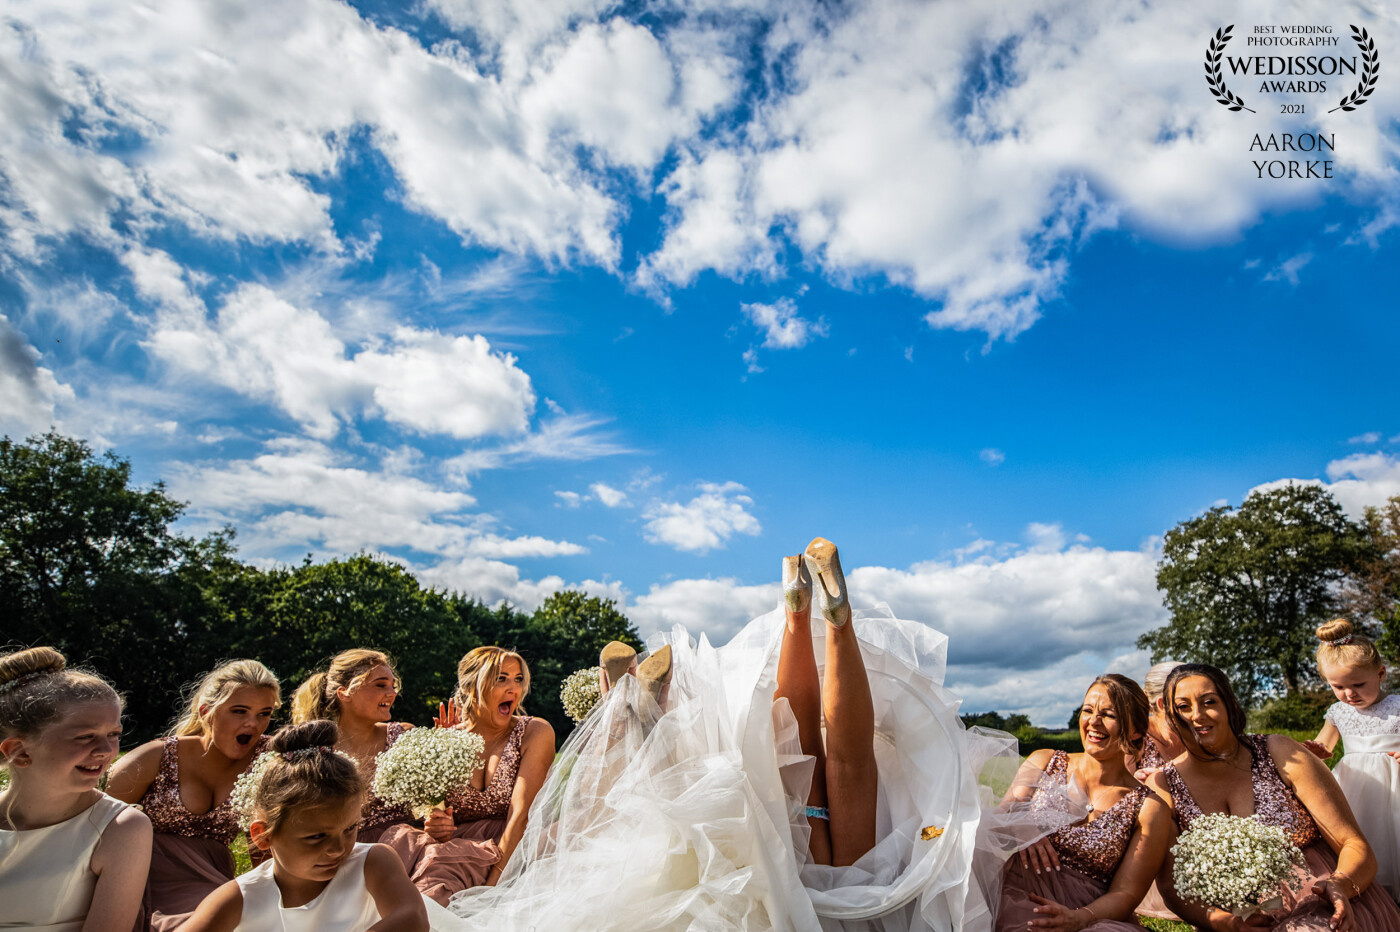 This wedding image was shot at the beautiful Stanbrook Abbey in Worcestershire. There is a small hill at the back and this image was taken as the bride and her party were waiting for the groom to arrive! They were so much fun and I enjoyed this wedding so much!